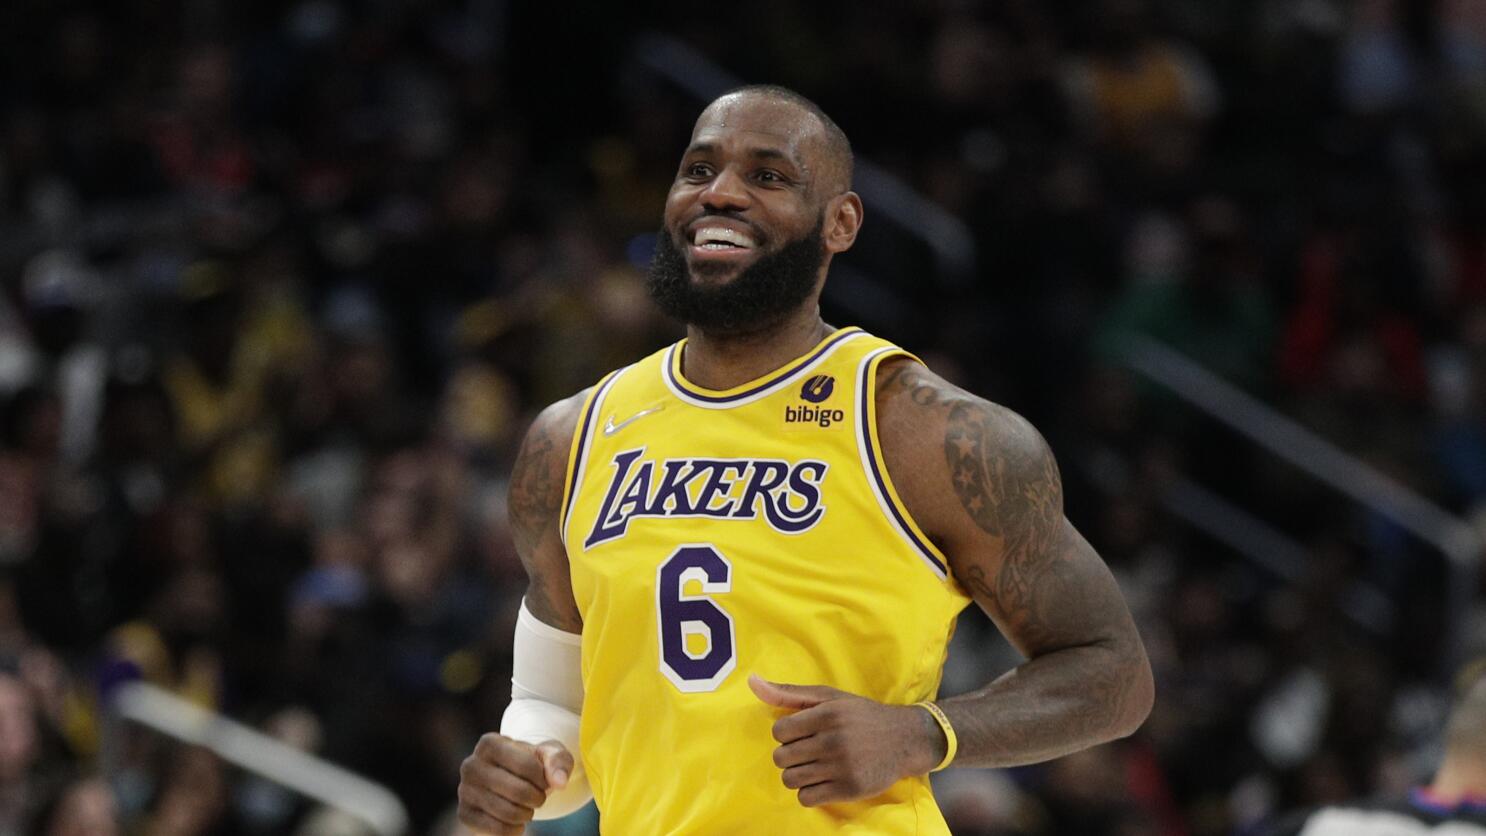 LeBron James agrees to $97 million contract extension with Lakers